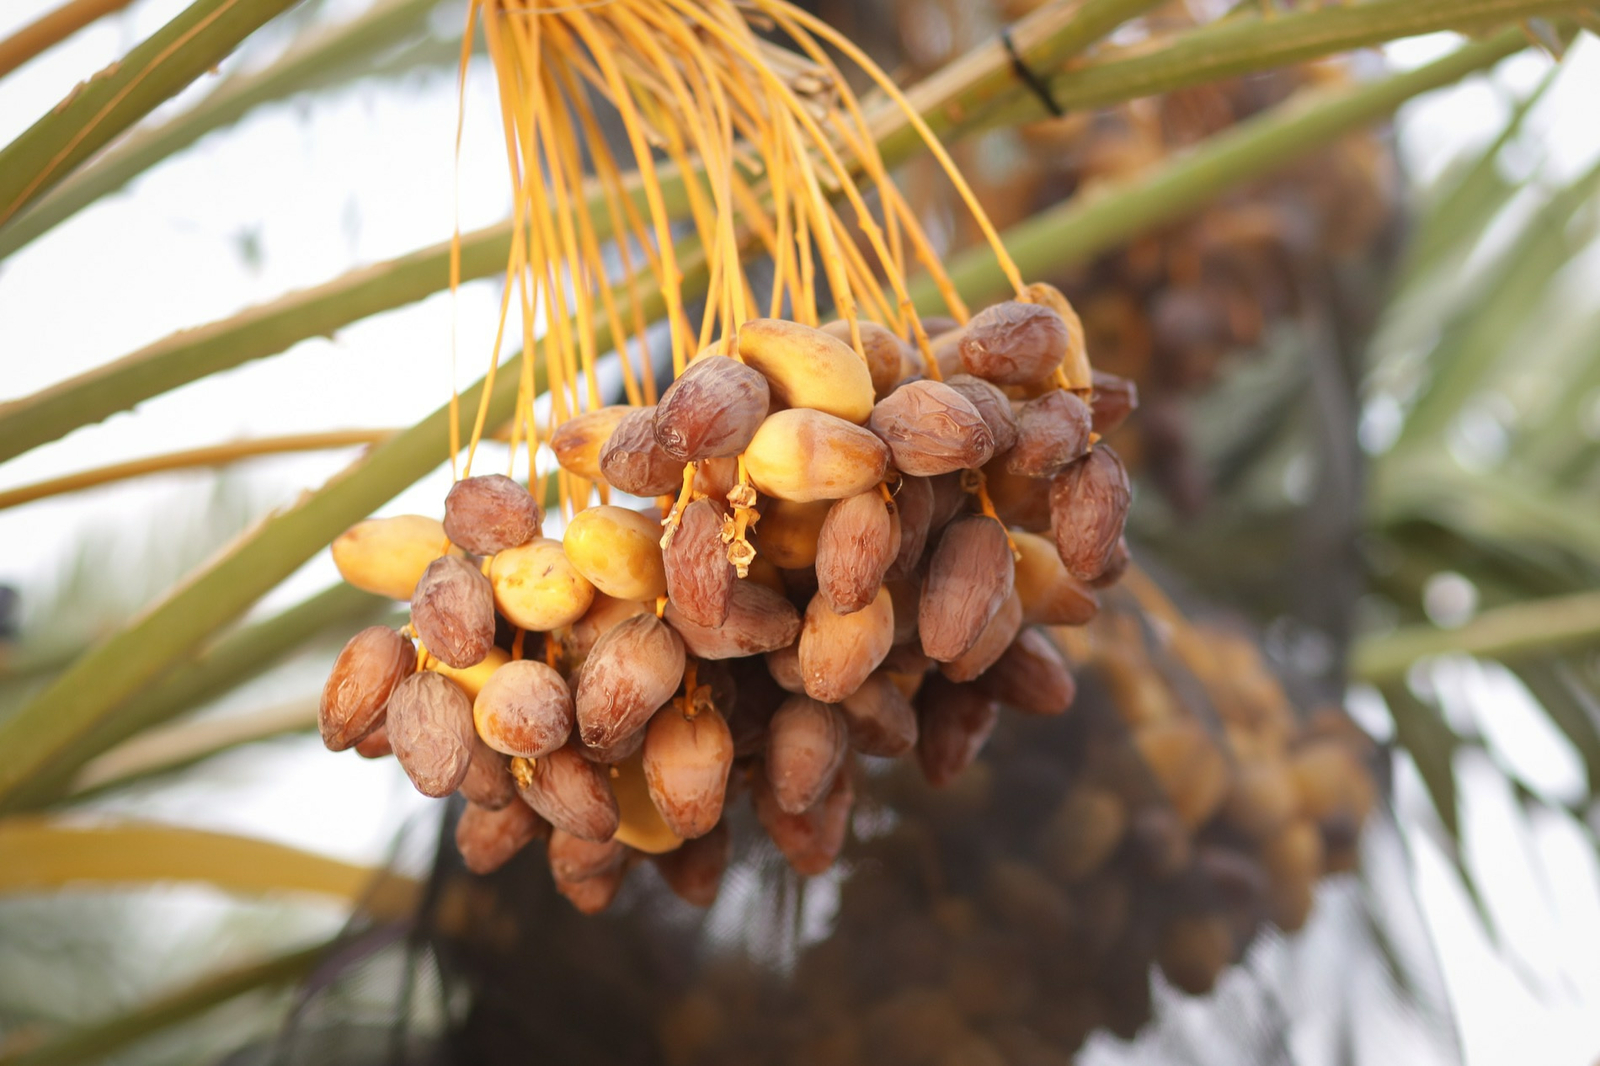 A close-up of mature dates growing on the Date Palms tree